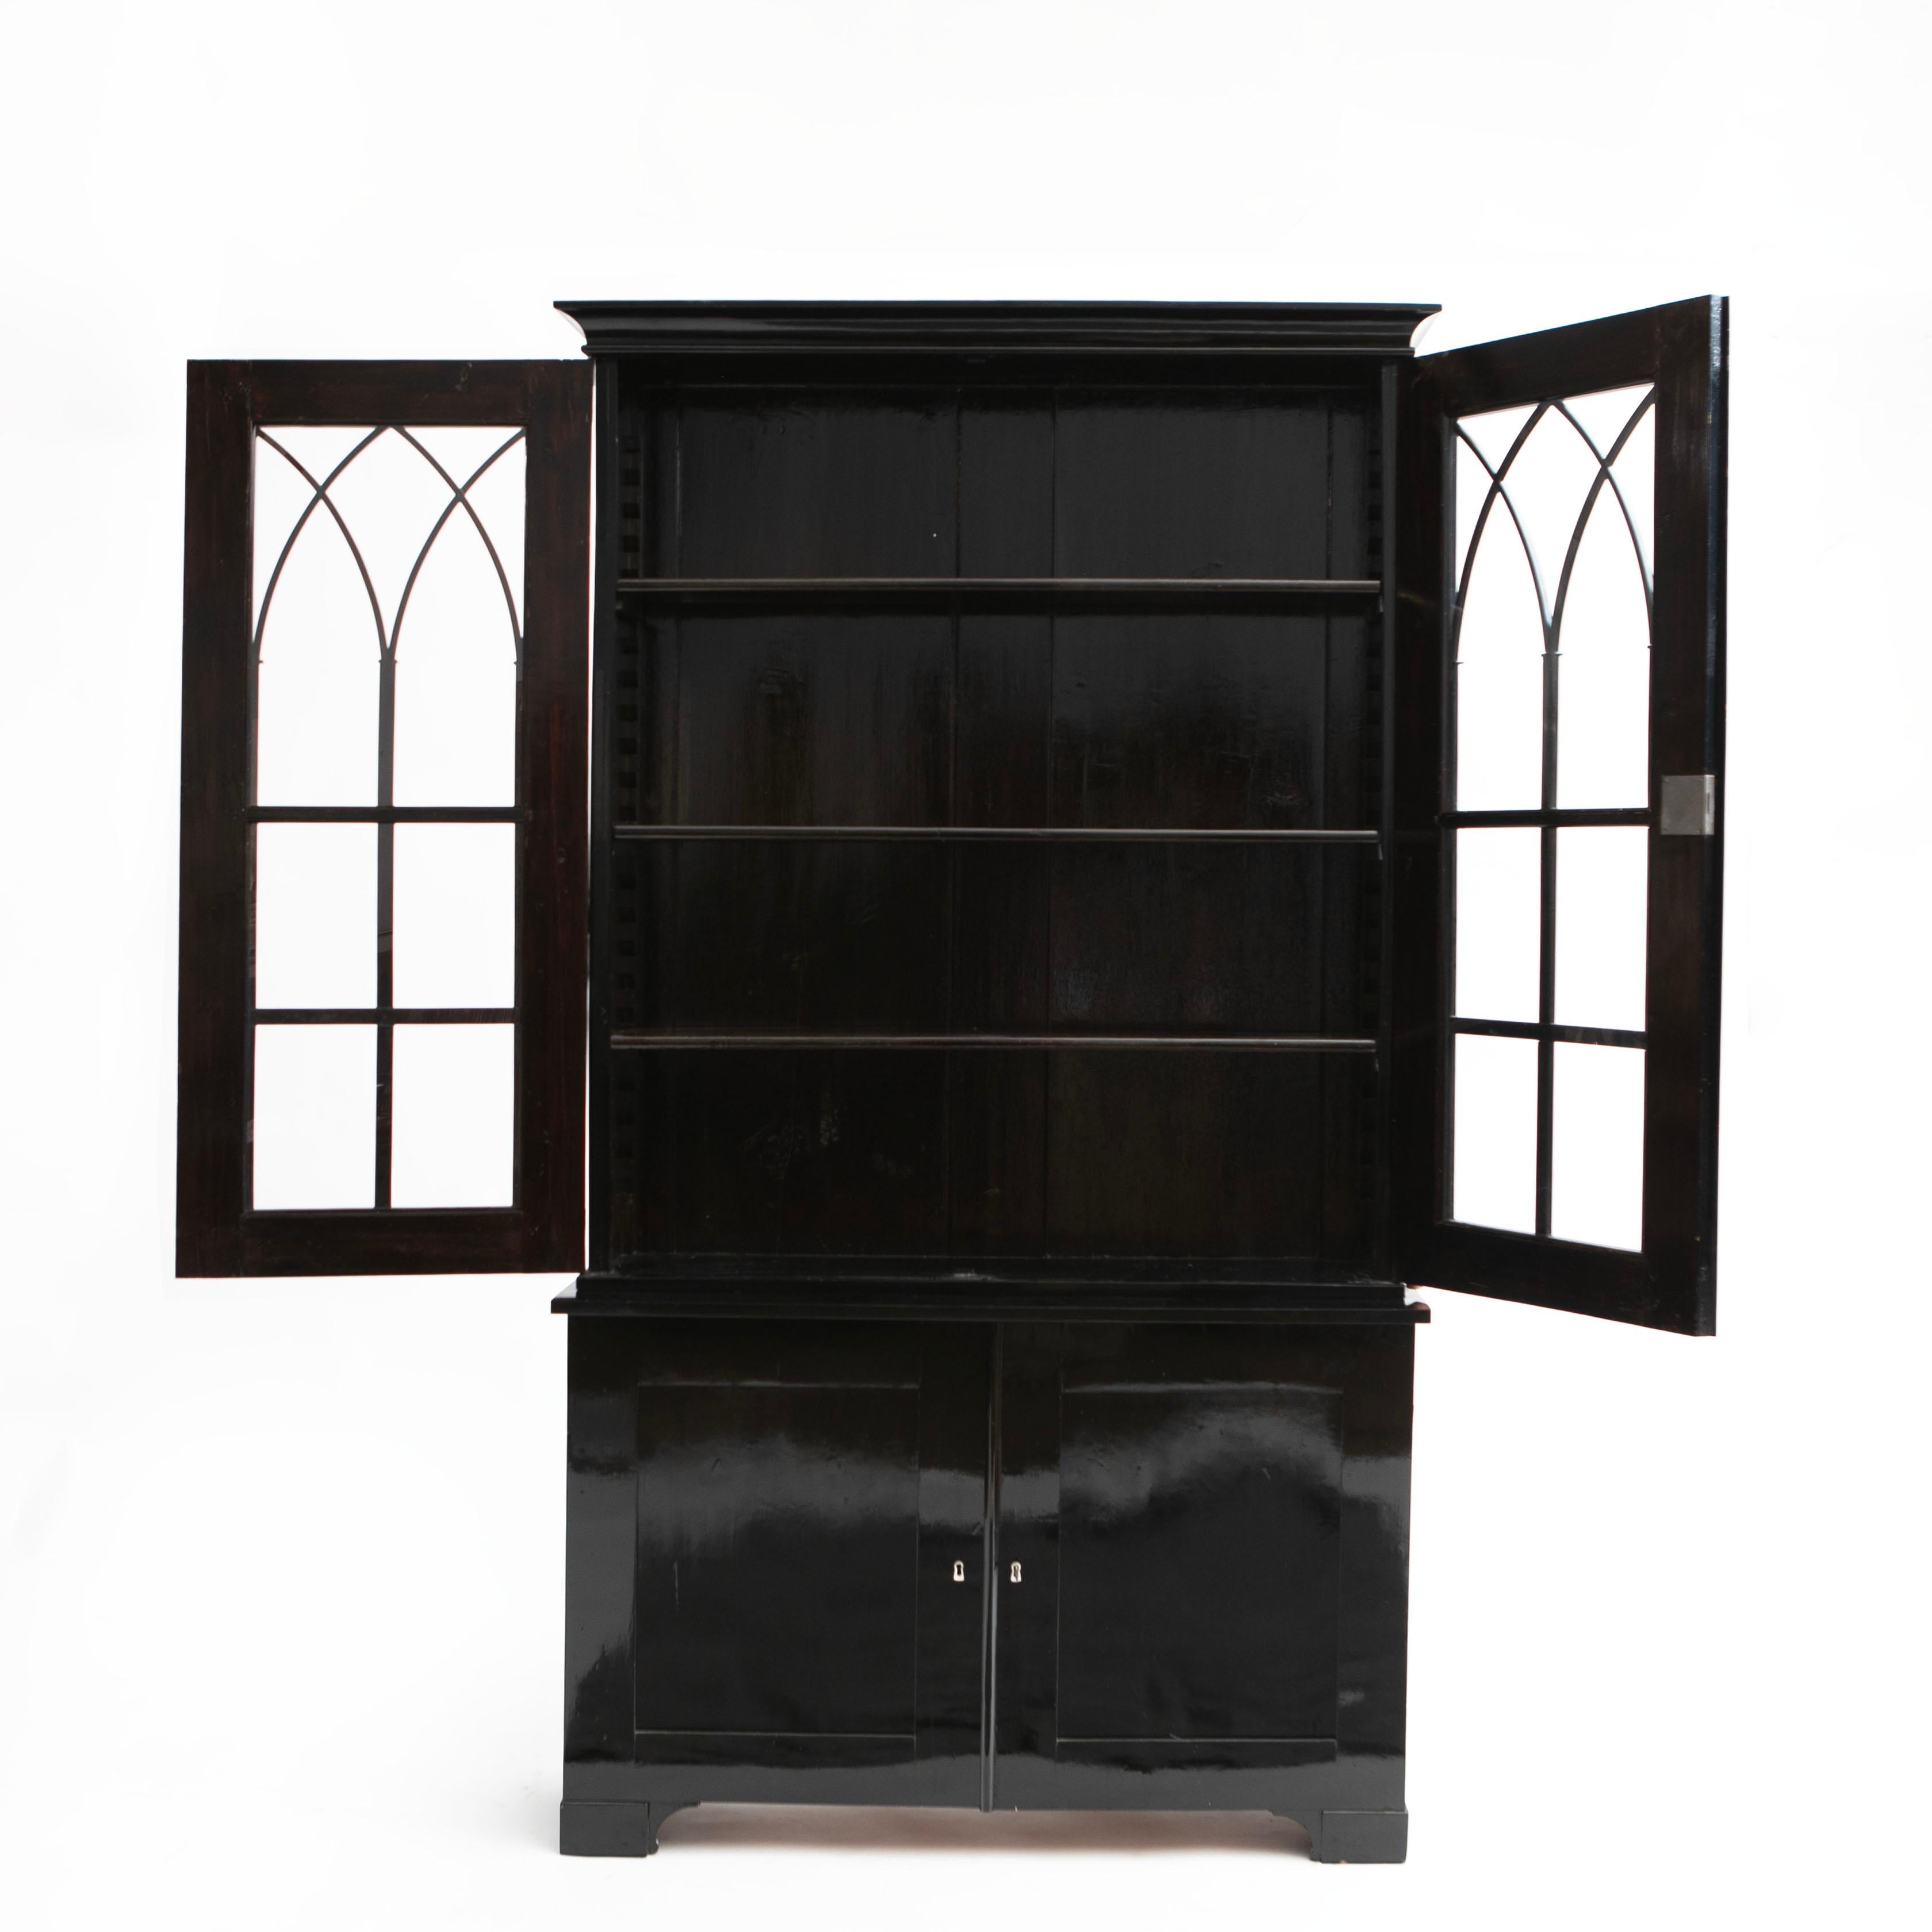 Swedish late empire bookcase / display cabinet in black-polished birch.
In 2 parts, upper case having mullioned glass front with cathedral arch cornice. 
Lower part with a pair of paneled doors. Both opening to shelved interior.
(Cabinet is in two